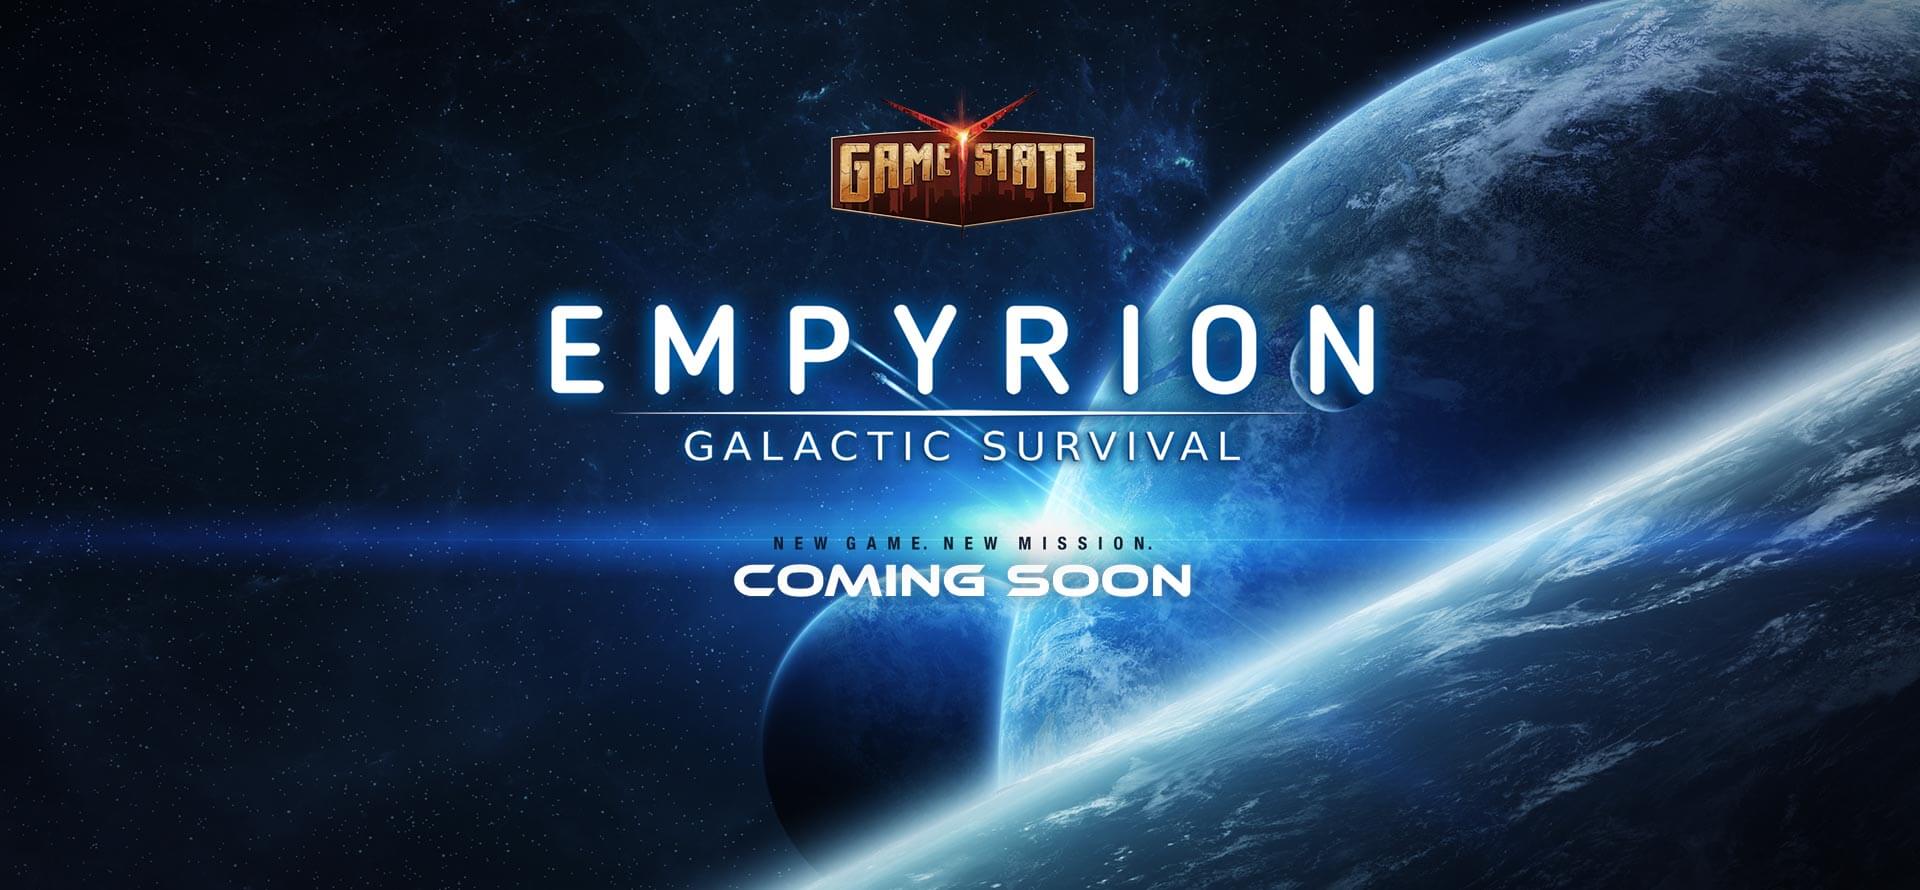 Games State Empyrion